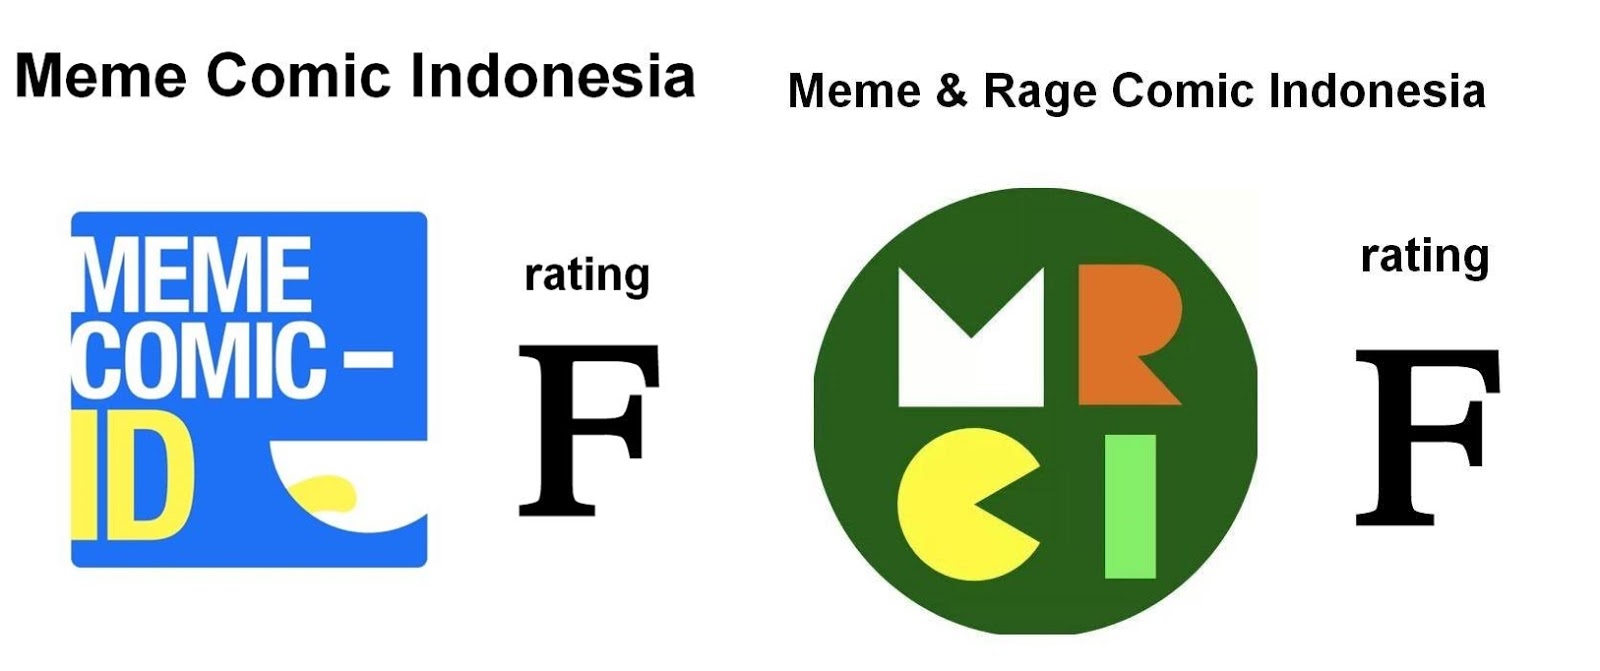 Rate Page Of Meme Comic Indonesia And Meme Rage Comic Indonesia